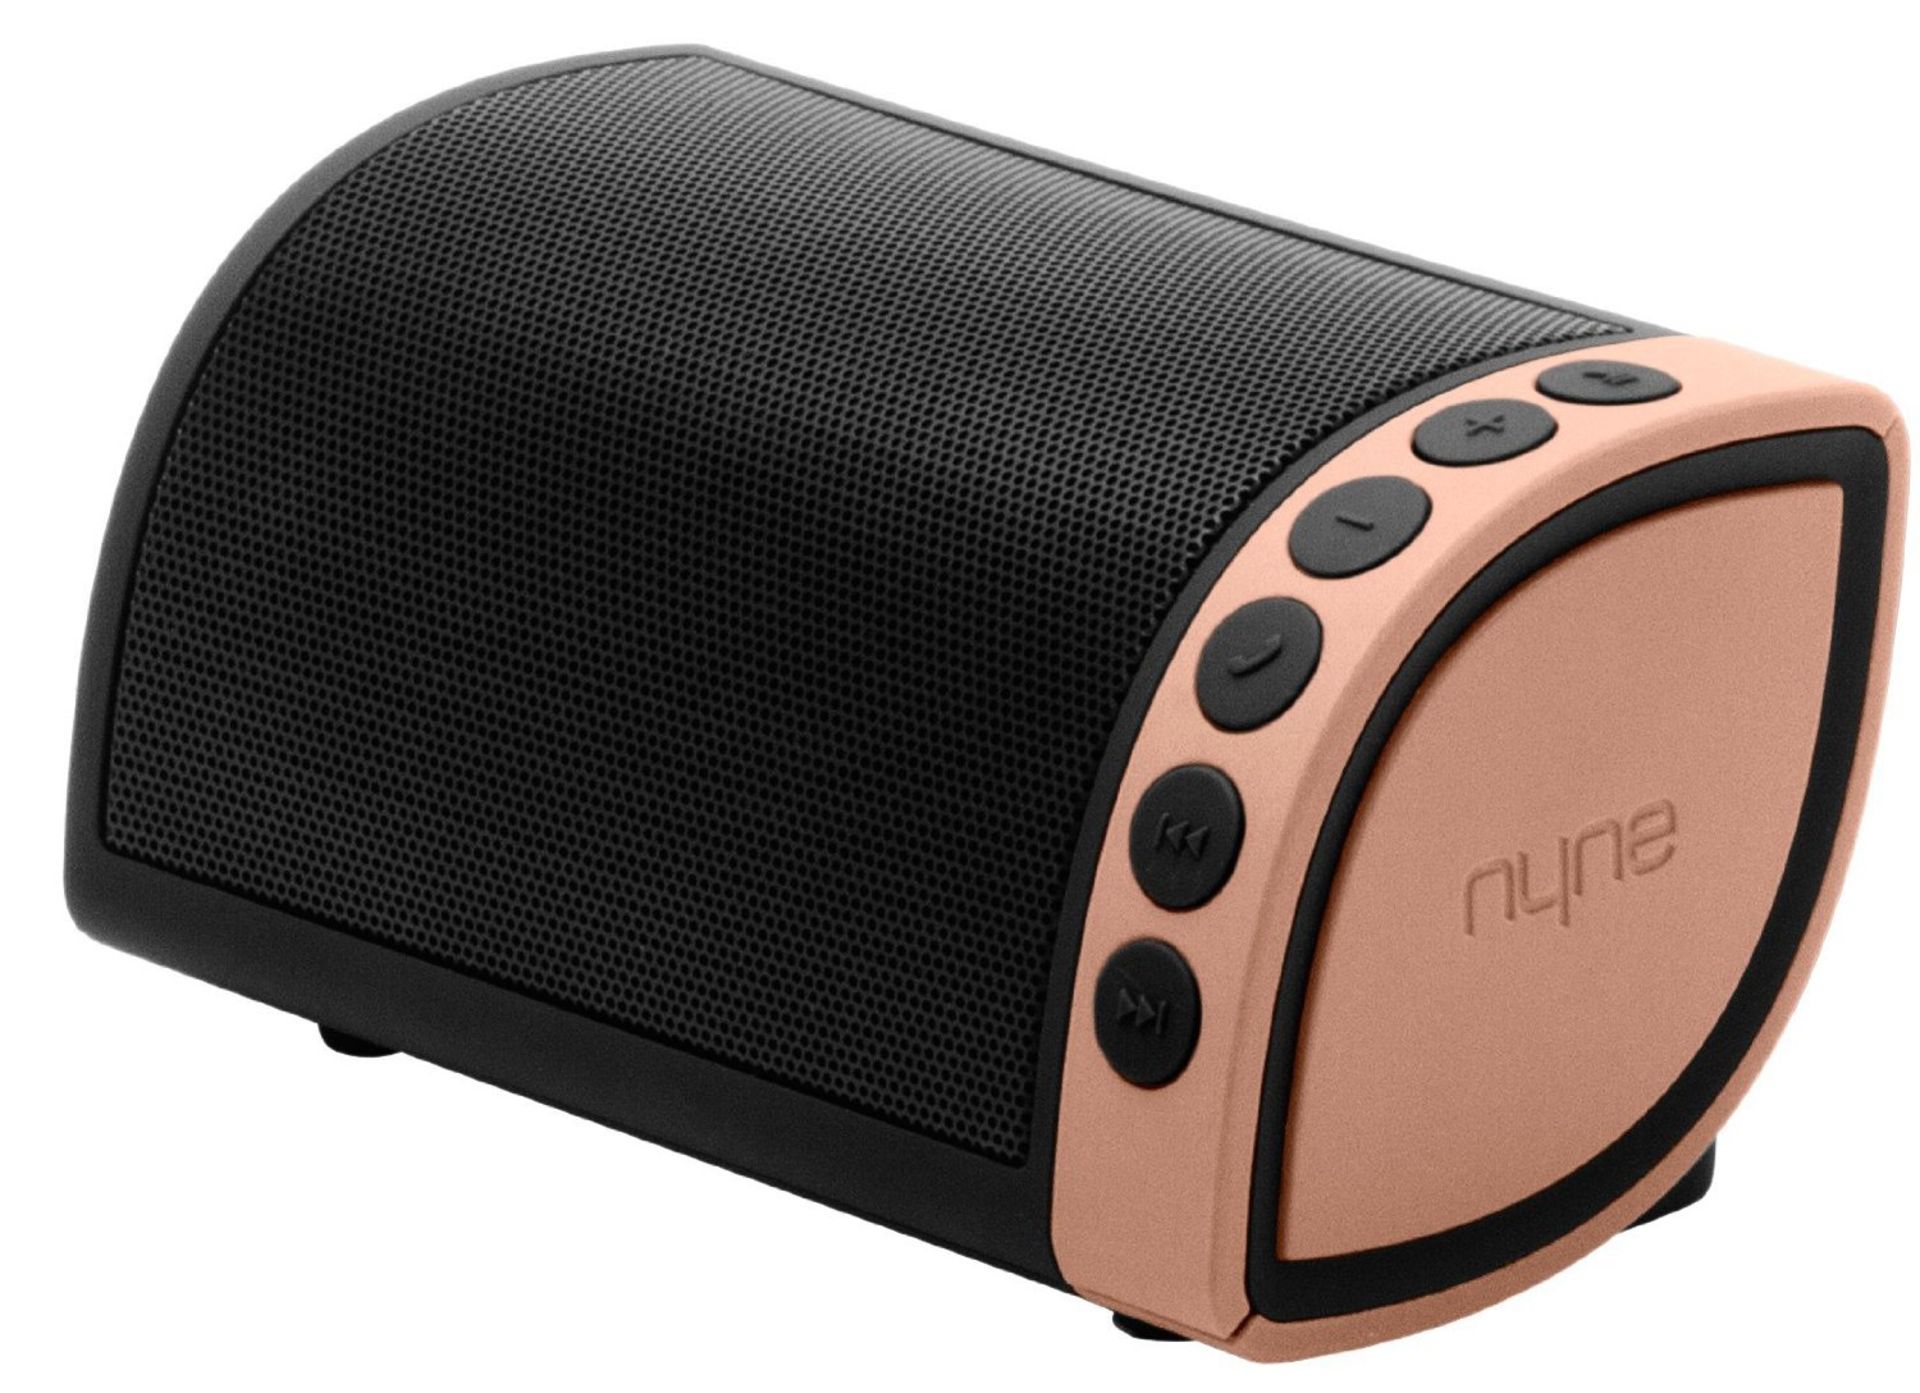 V Brand New Nyne Cruiser Universal Rechargeable Rugged Portbale Bluetooth Wireless Speaker with